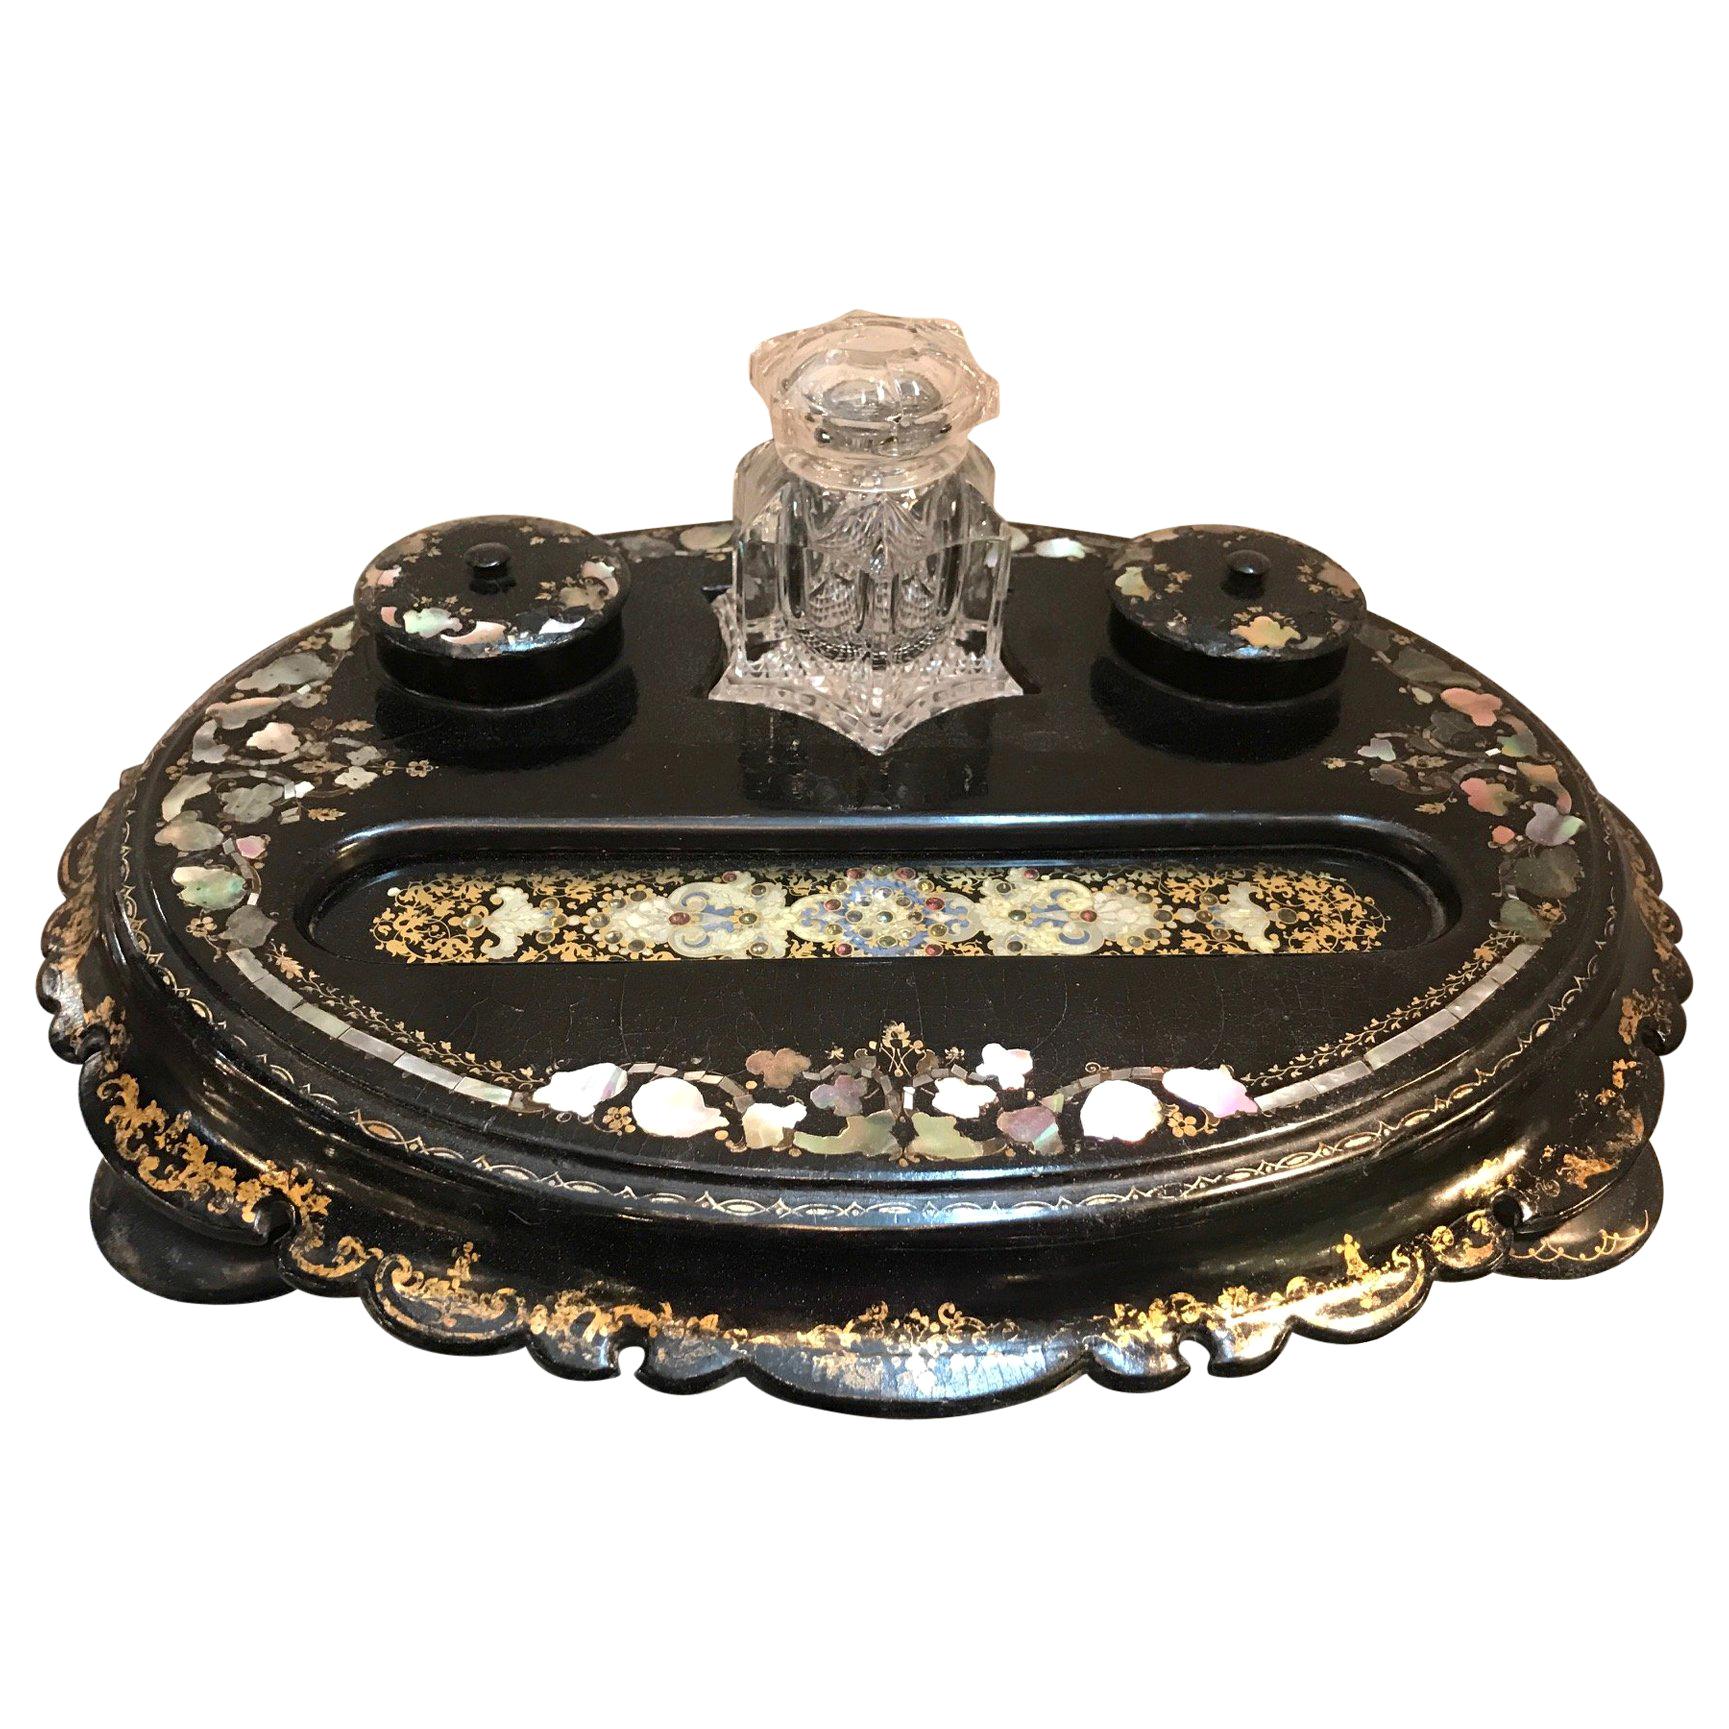 19th Century English Papier Mâché Inkstand with Inlaid Mother of Pearl Inlay